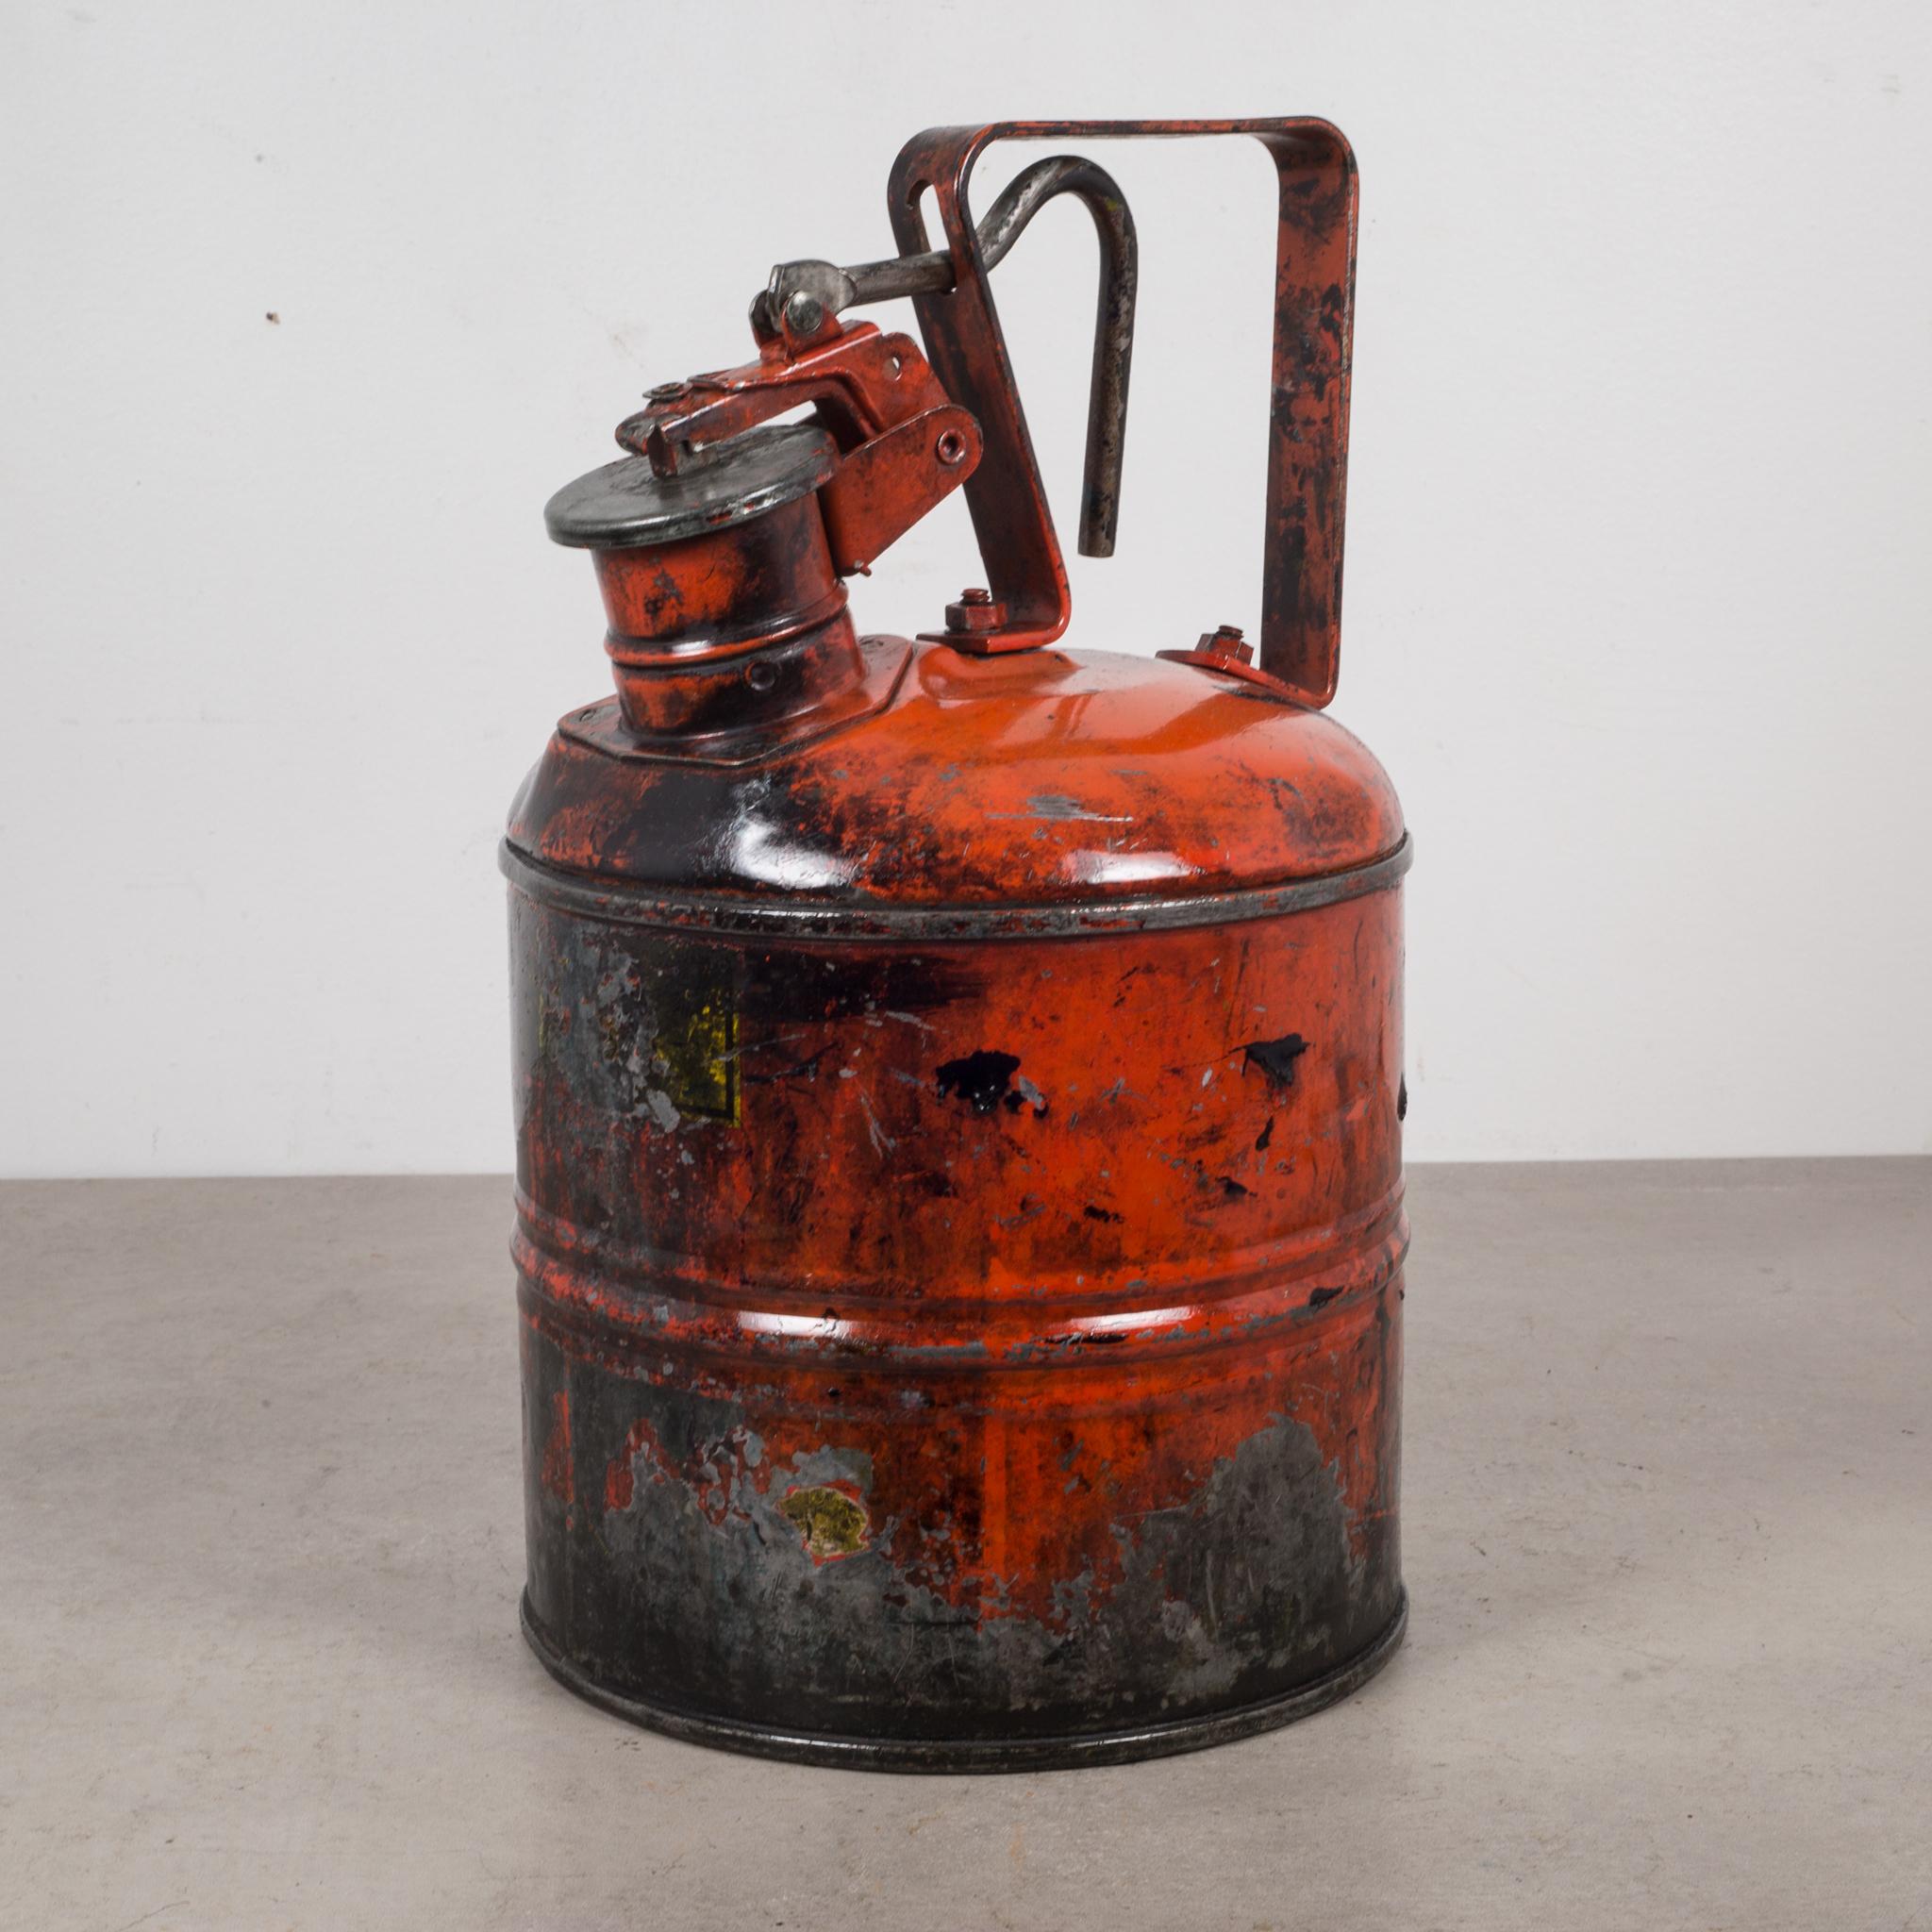 About:

Vintage red metal safety gas cans with handle grip that opens the can. Shellacked to preserve the paint and for a clean finish.

Creator: Underwriter's Laboratories Inc.
Date of manufacture: circa 1940-1950.
Materials and techniques: Metal,